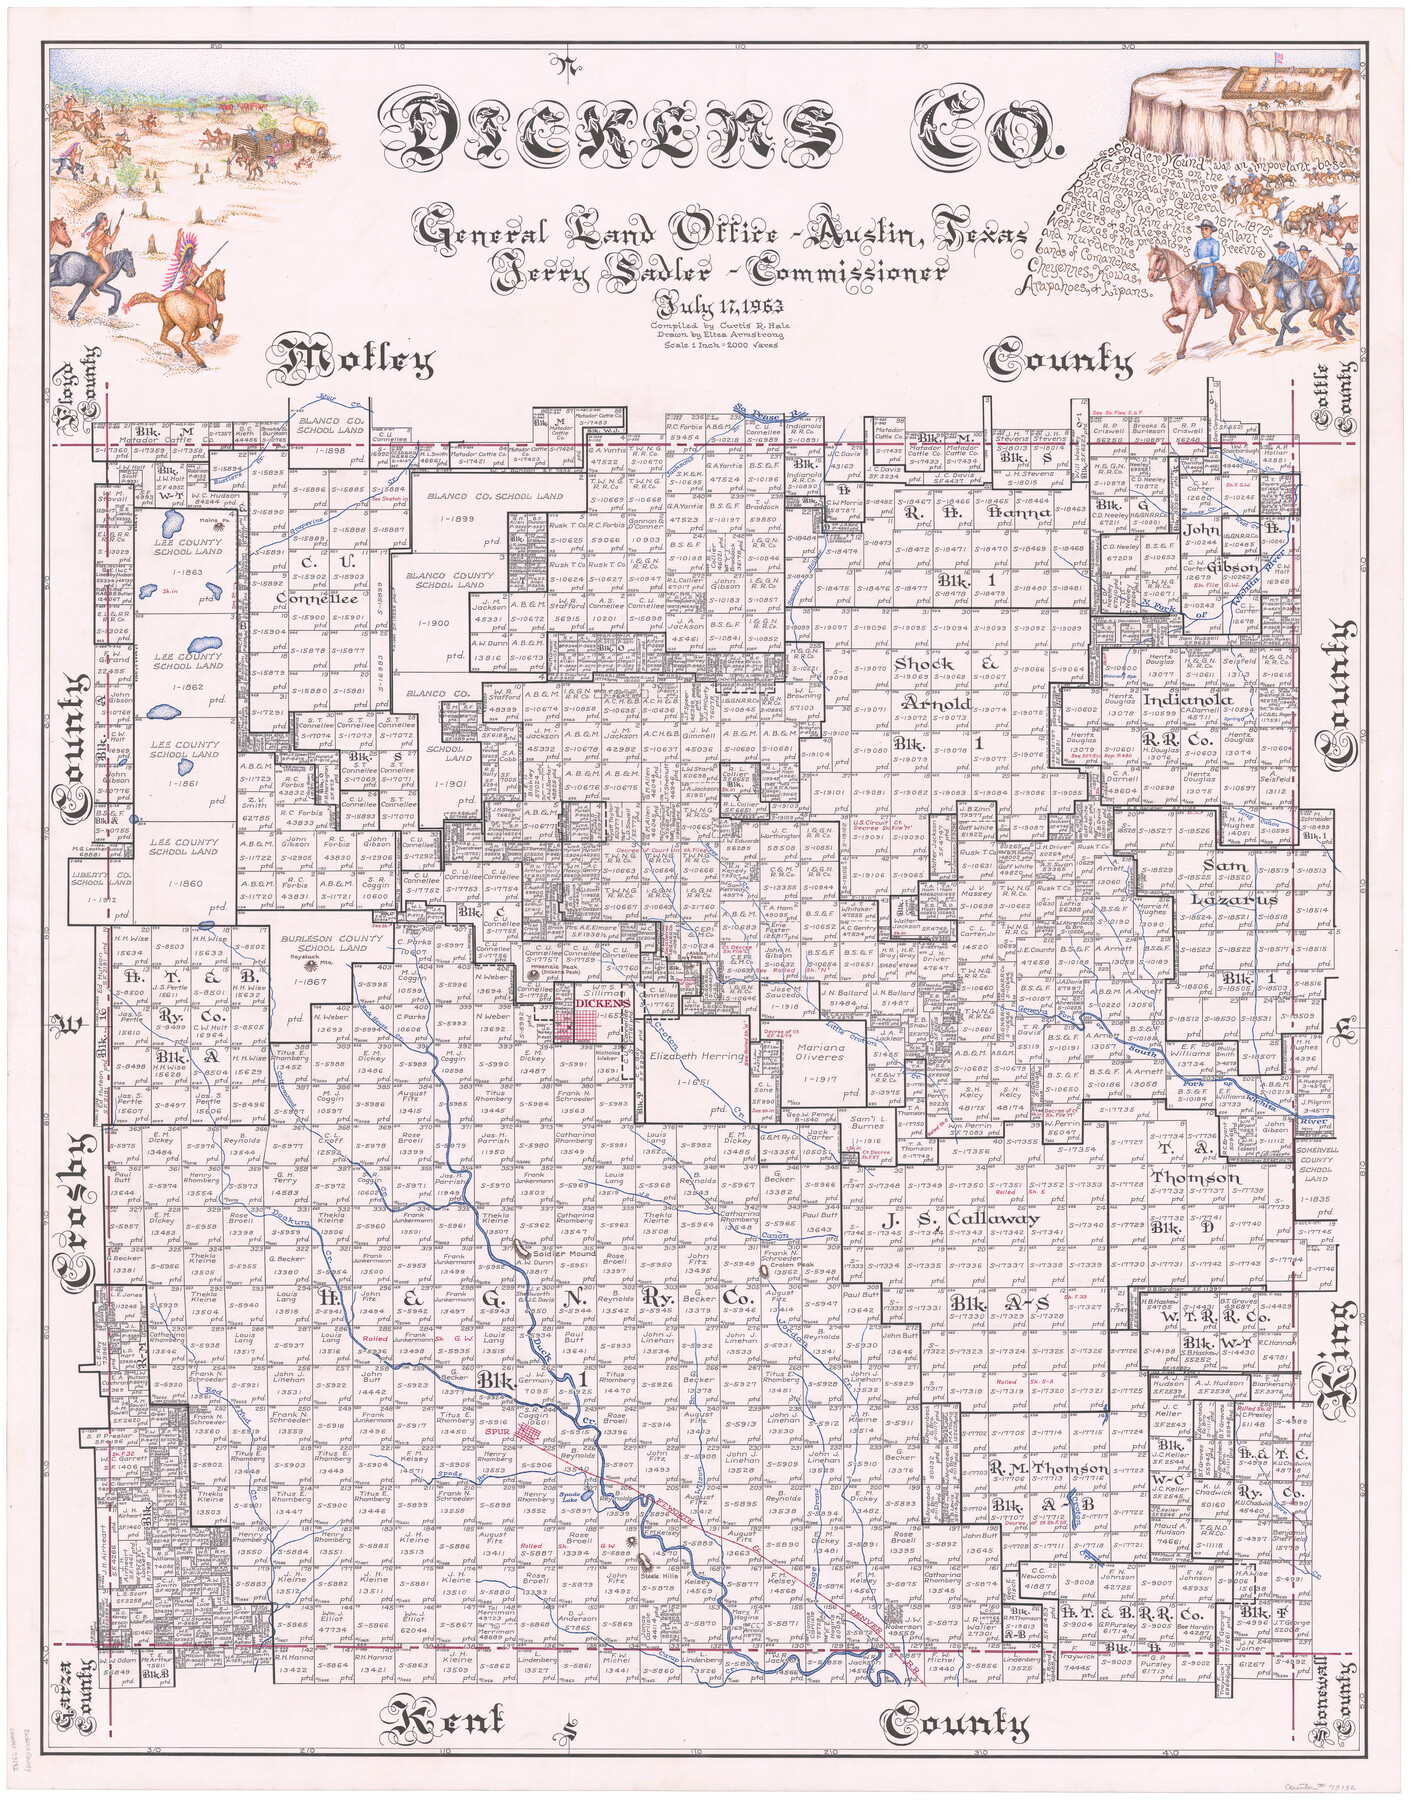 73132, Dickens Co., General Map Collection